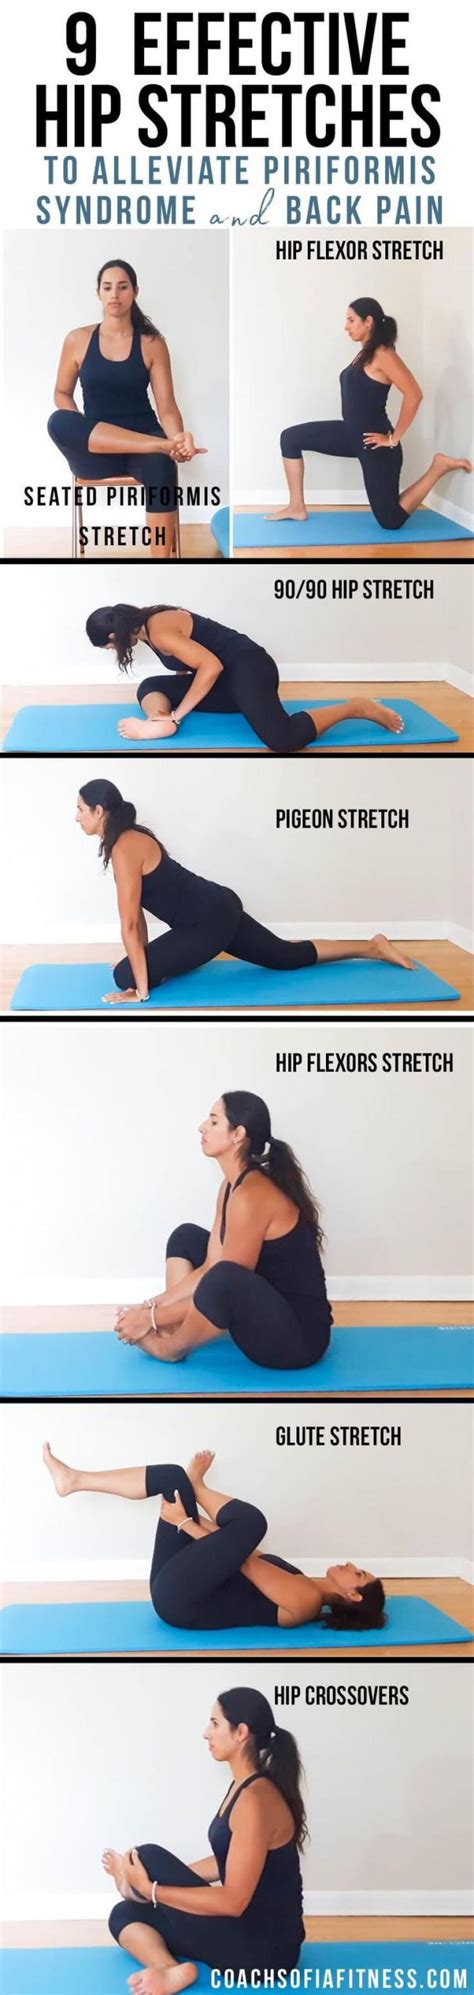 How To Release The Piriformis Muscle Massage Ball And Stretching Classic Guides